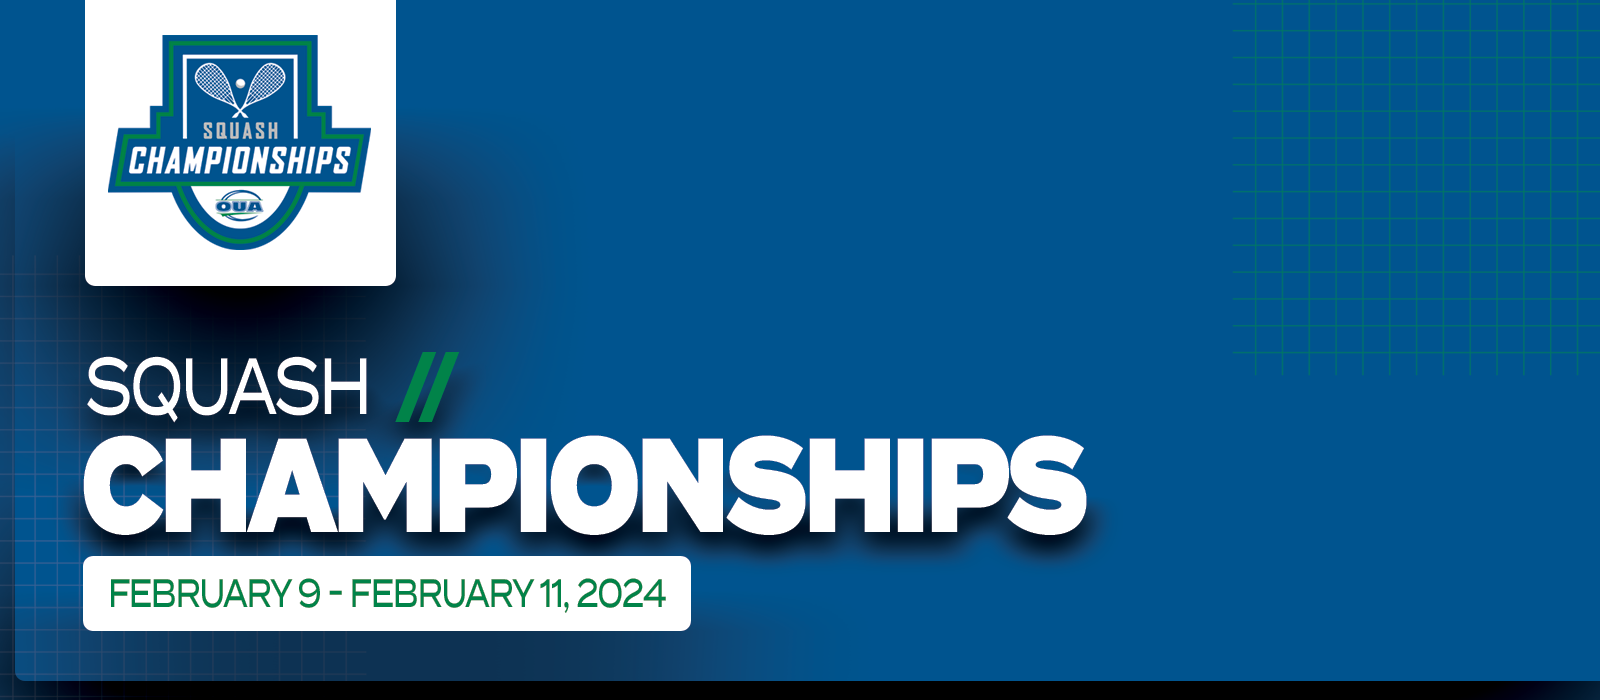 Predominantly blue graphic with large white text on the left side that reads Squash Championships, February 9 ? February 11, 2024? beneath the OUA Squash Championships logo